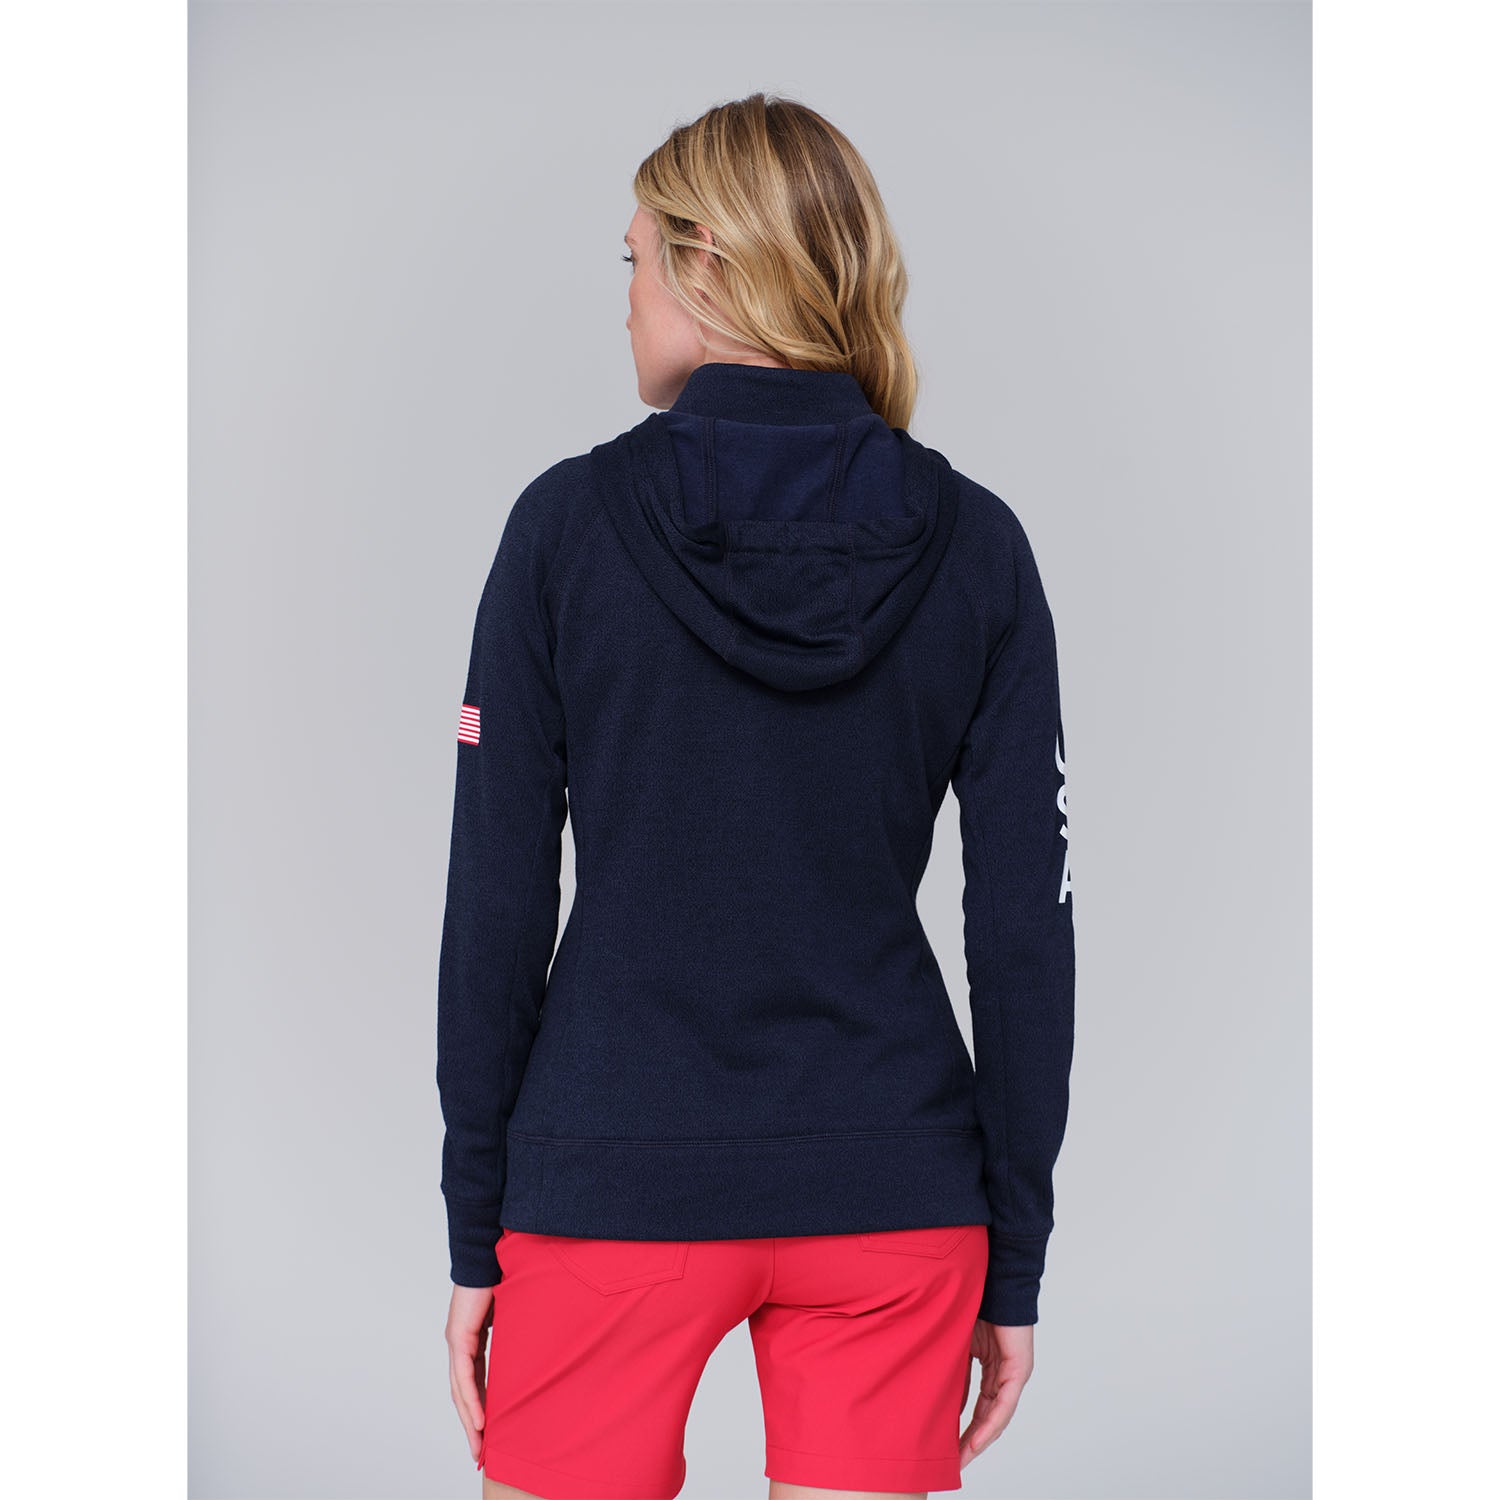 Dunning 2023 LPGA Official Solheim Cup Team Uniform Women's Quarter Zip Hoodie in Halo Heather - Lifestyle Back View